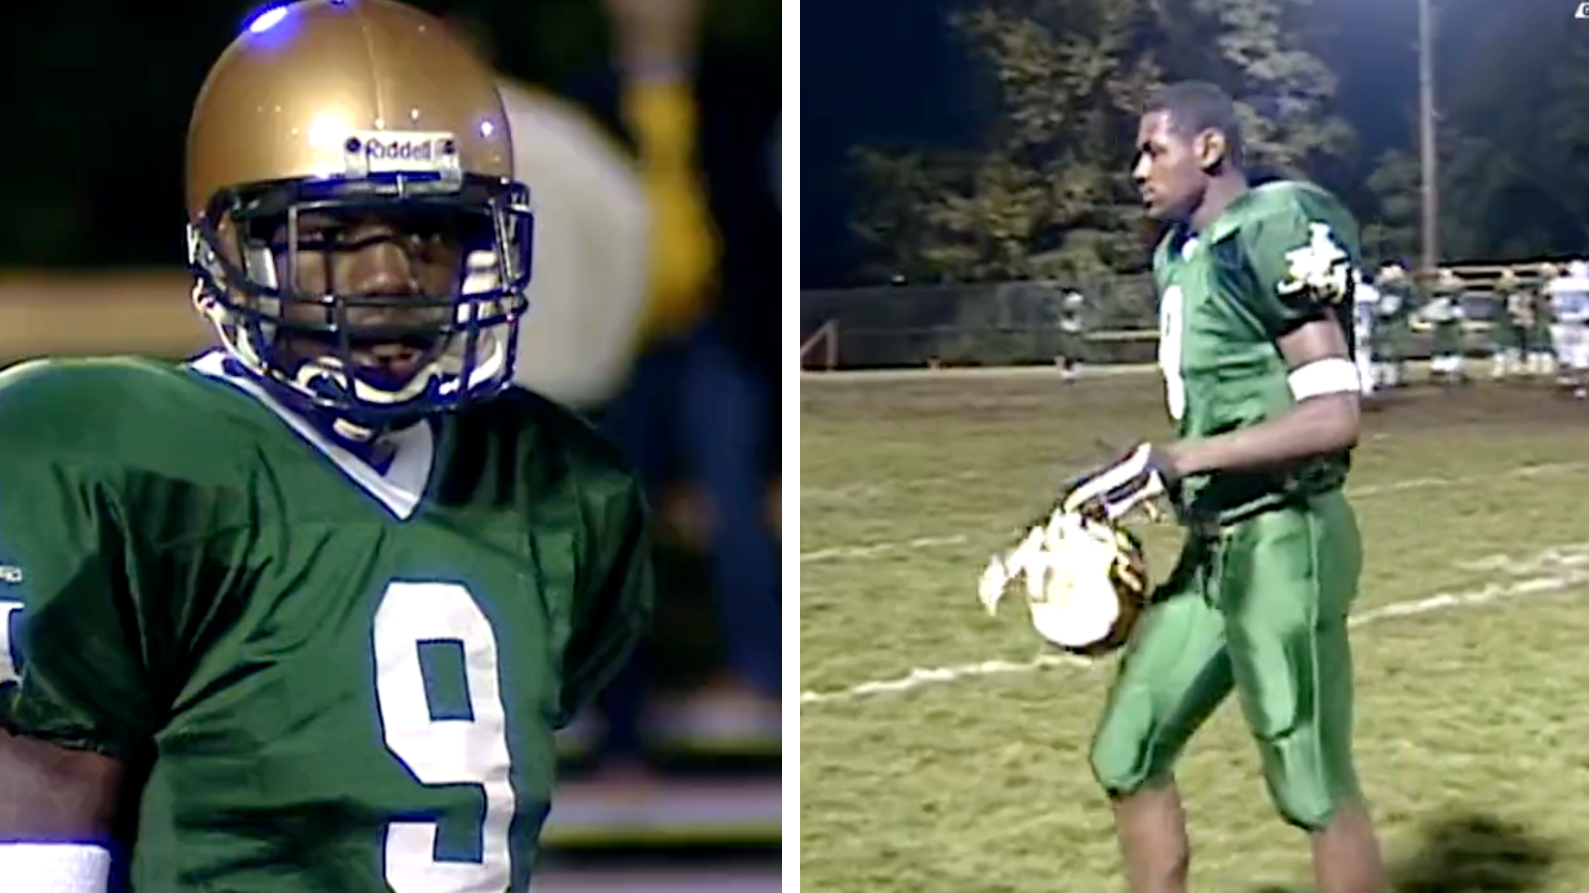 Unseen footage emerges online of LeBron James playing football in